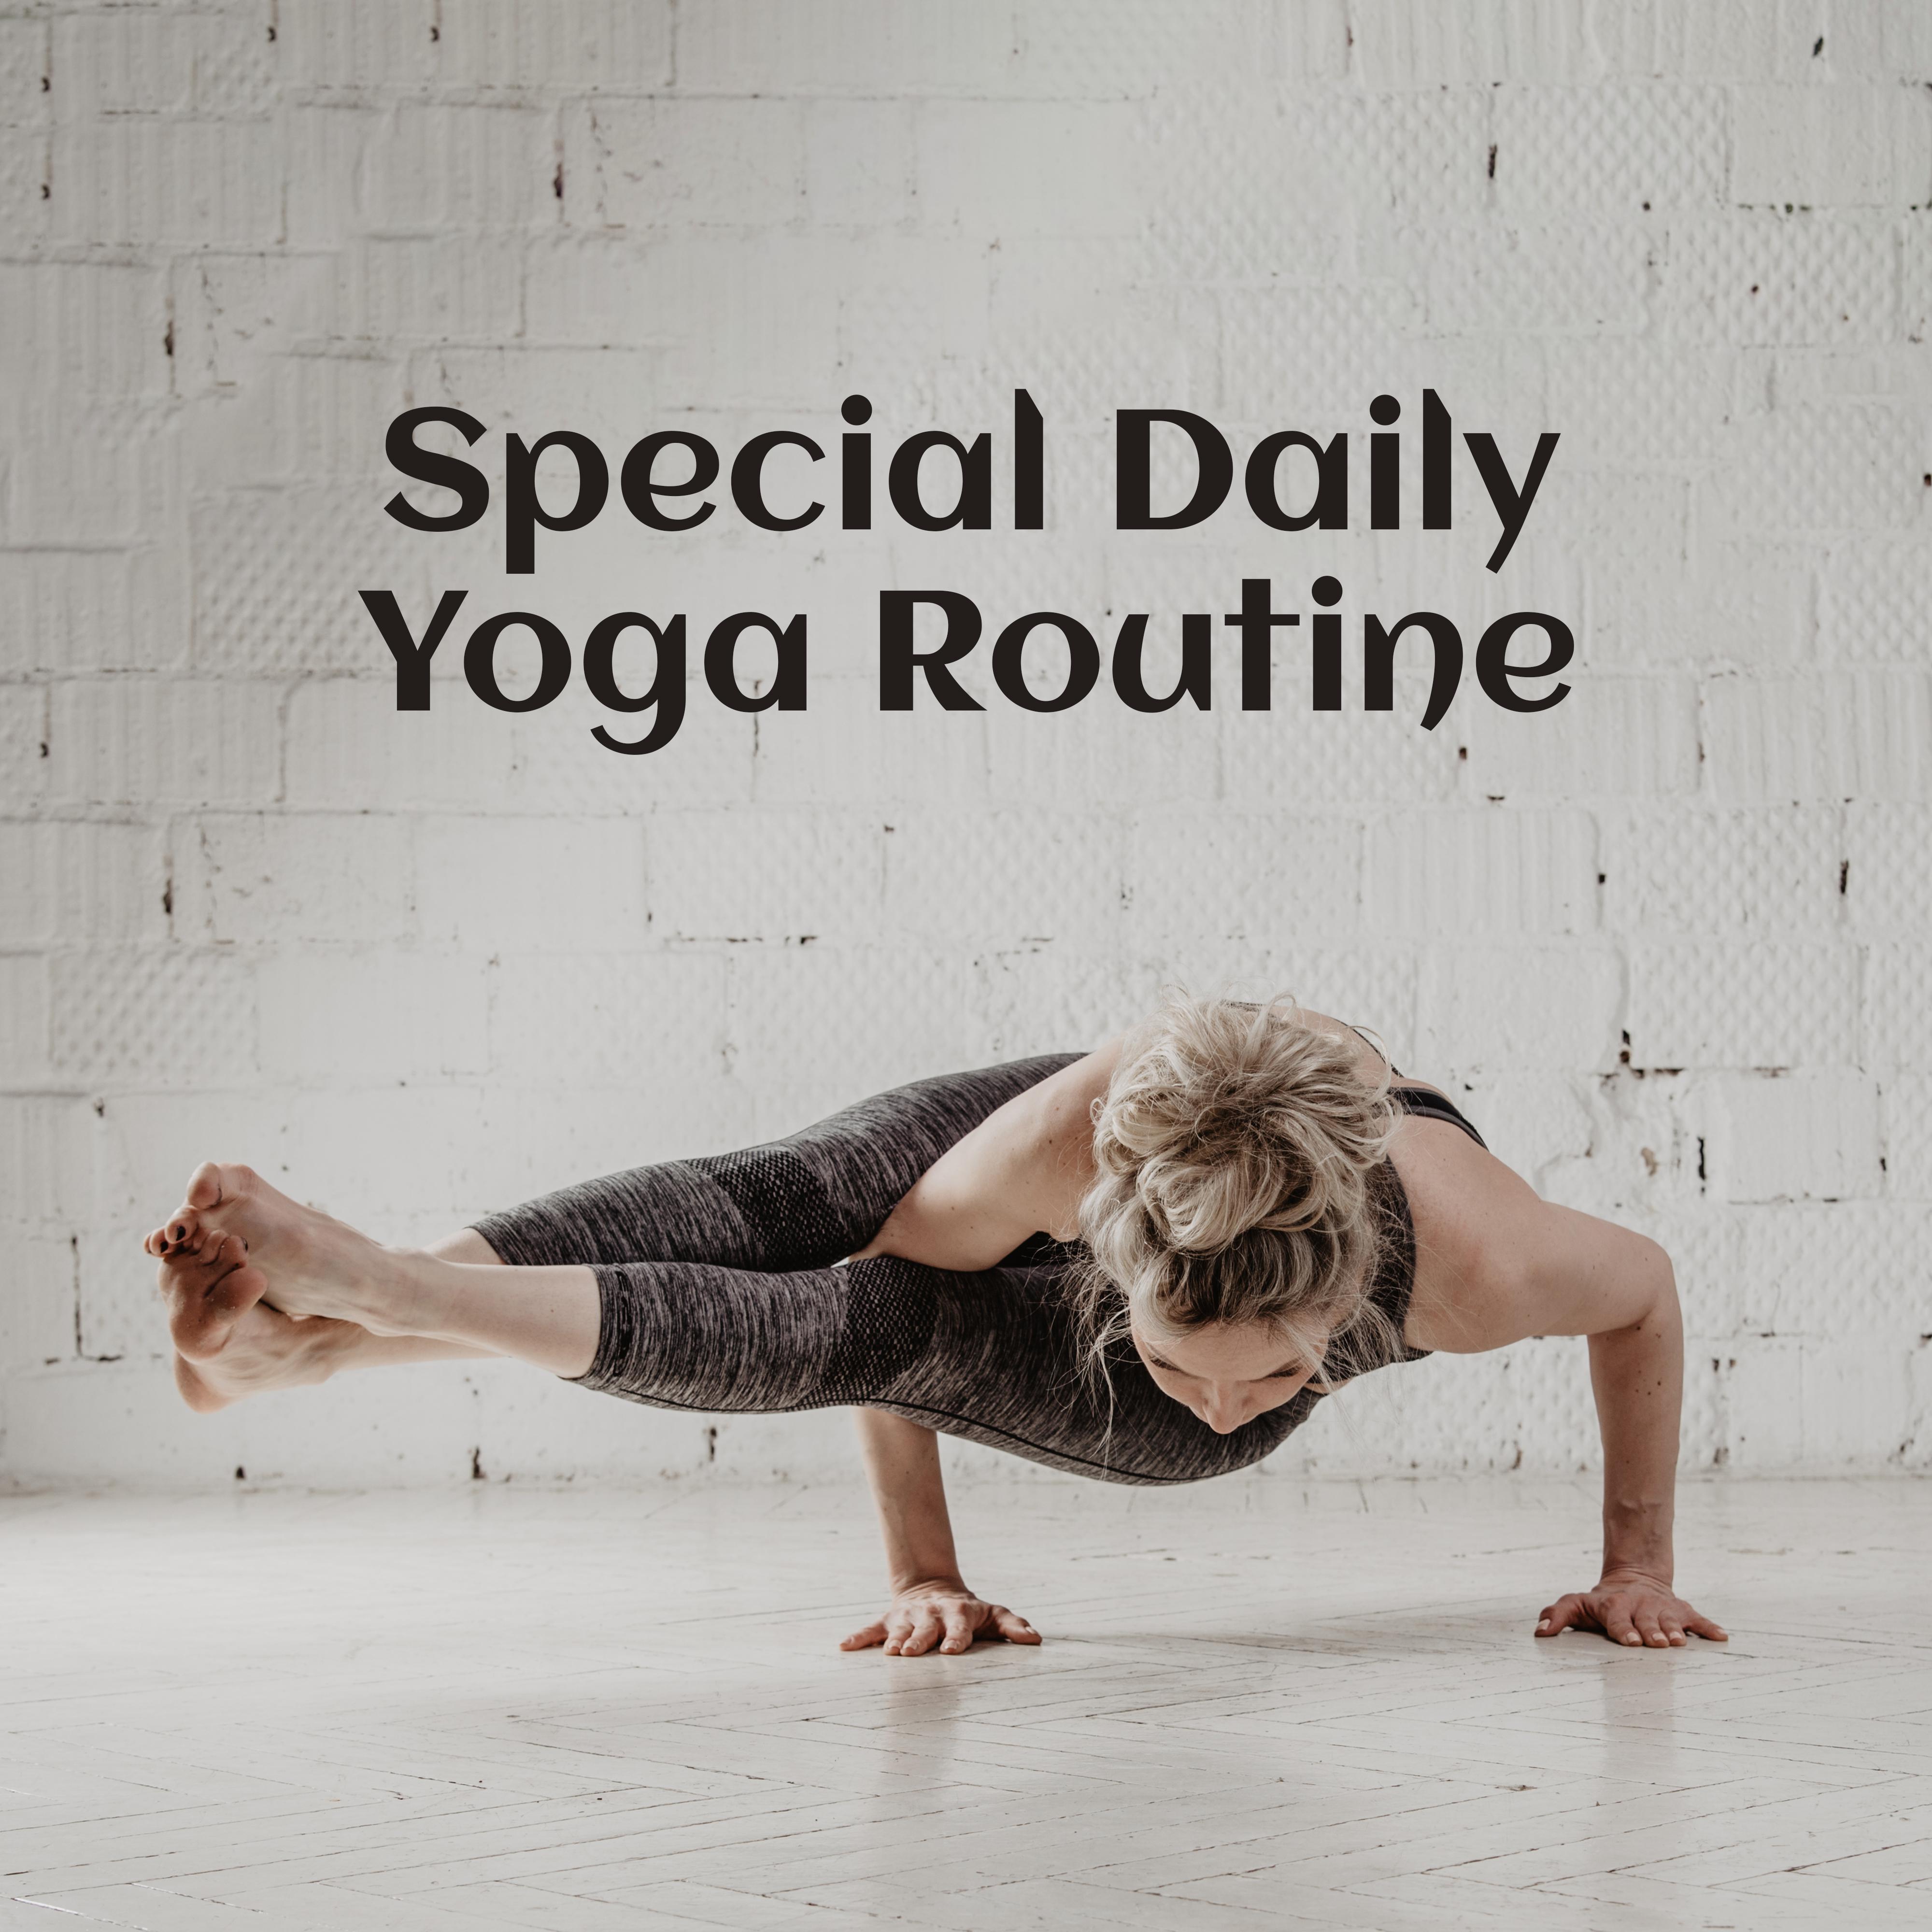 Special Daily Yoga Routine: 2019 New Age Nature & Ambient Music for Intensive Yoga Training, Sounds fol Calm Mind & Healthy Body, Vital Energy Increase